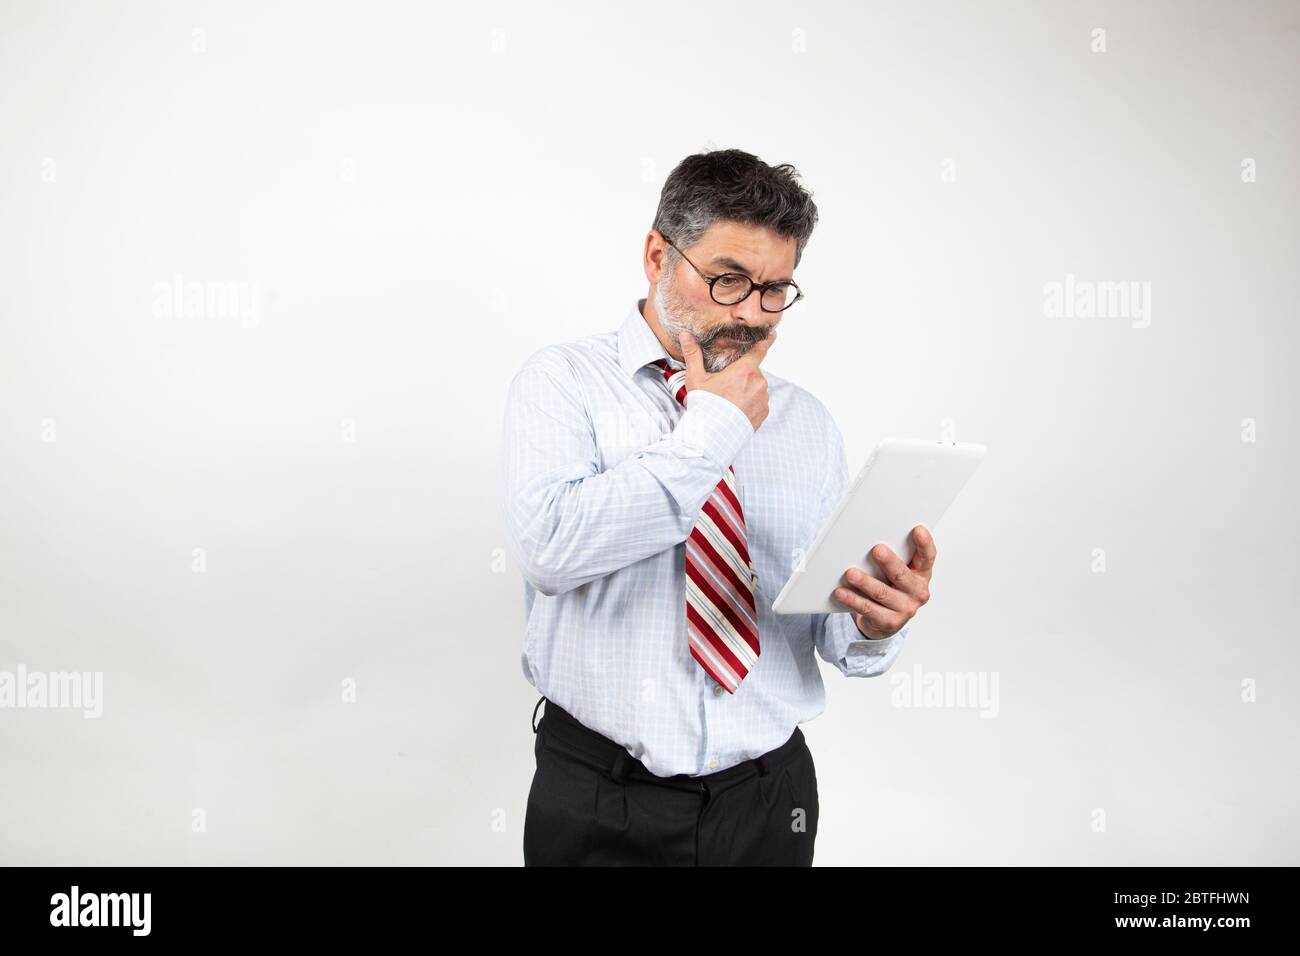 Portrait of classy serious Caucasian businessman in suit and glasses using tablet to read news on white background. Stock Photo